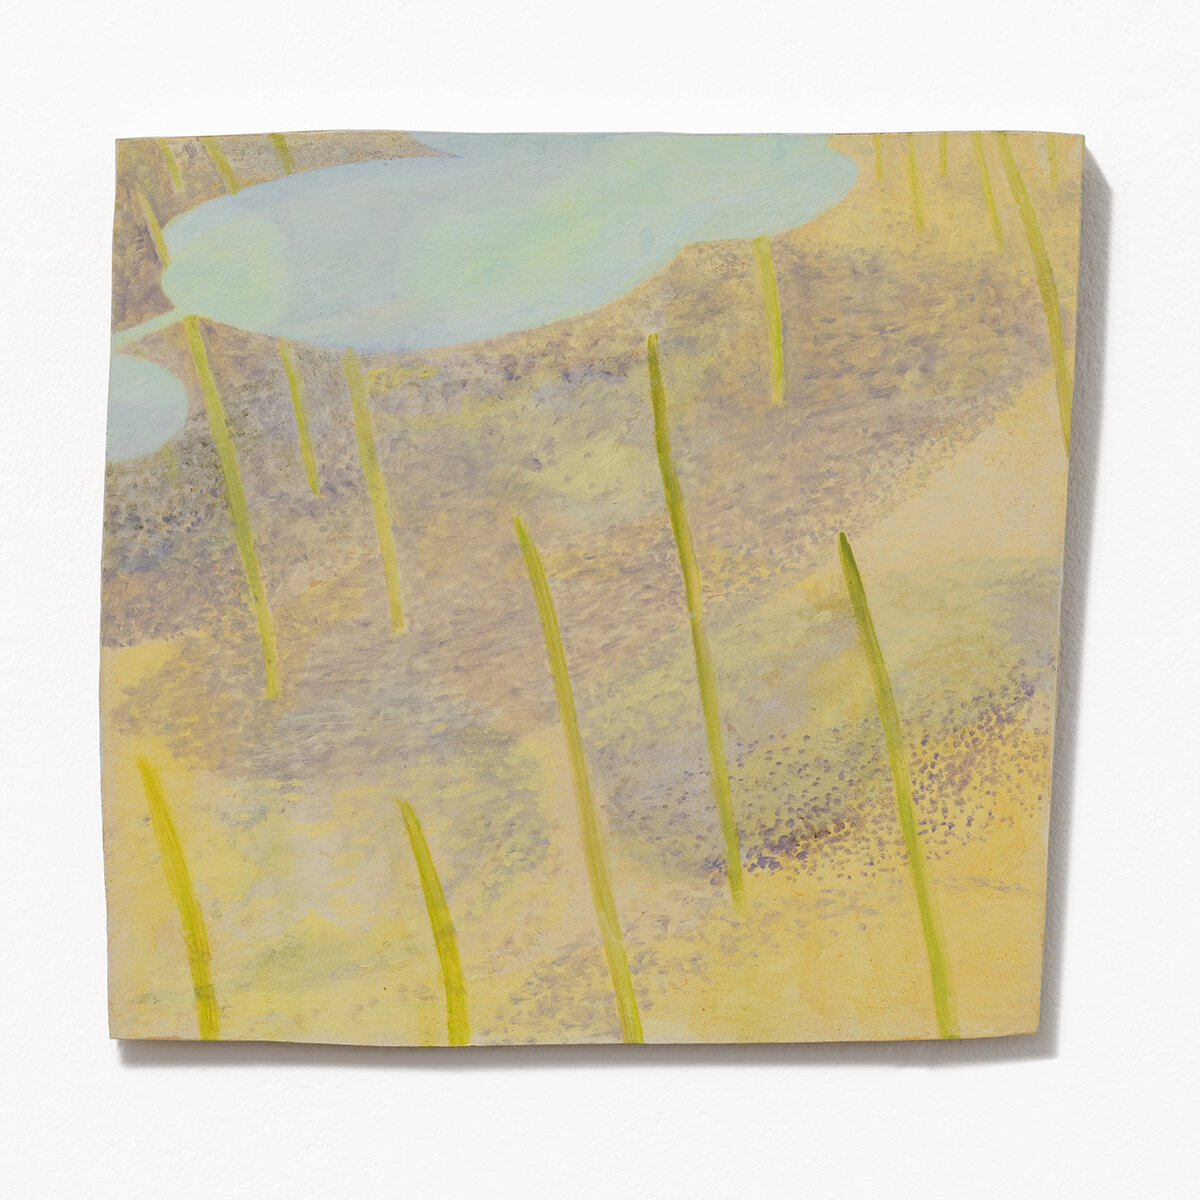   Study for Pond on Wheels XVIII   Oil on canvas on wood  12 ½ x 13 ½ x 1 inches  32 x 34 x 2 ½ cm 2020 